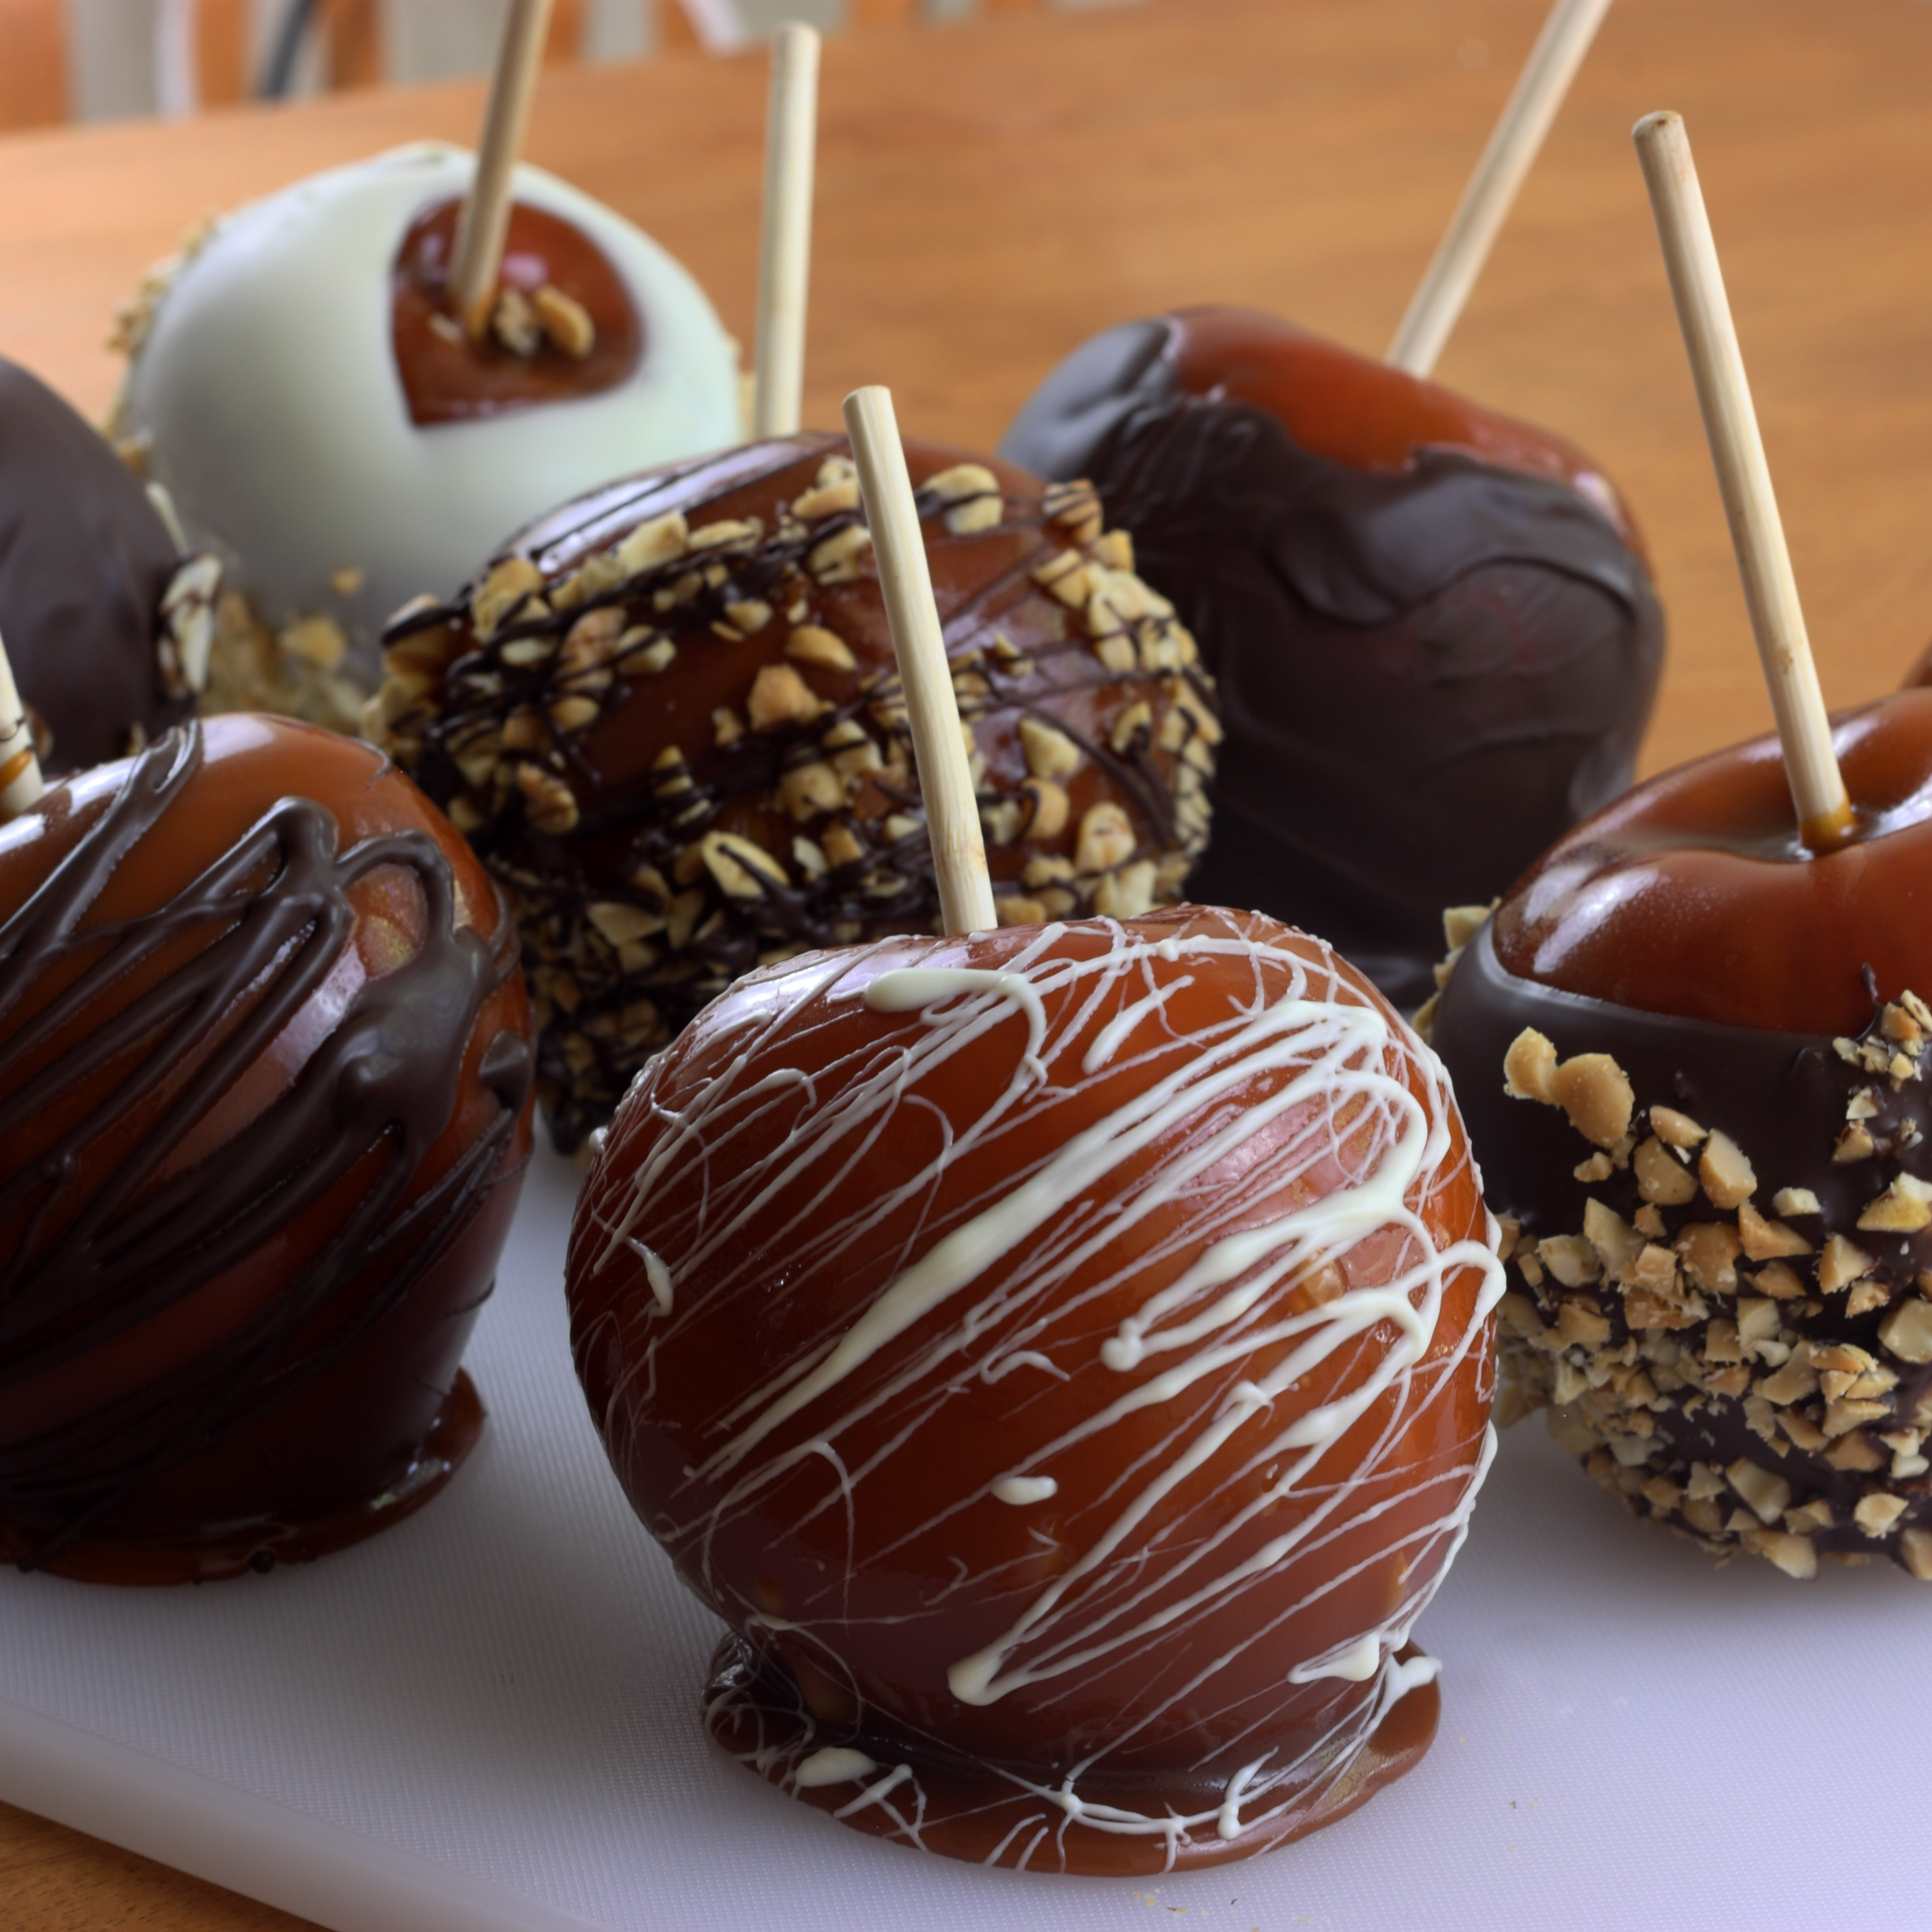 Honey Caramel Apples (some with white chocolate or nuts)